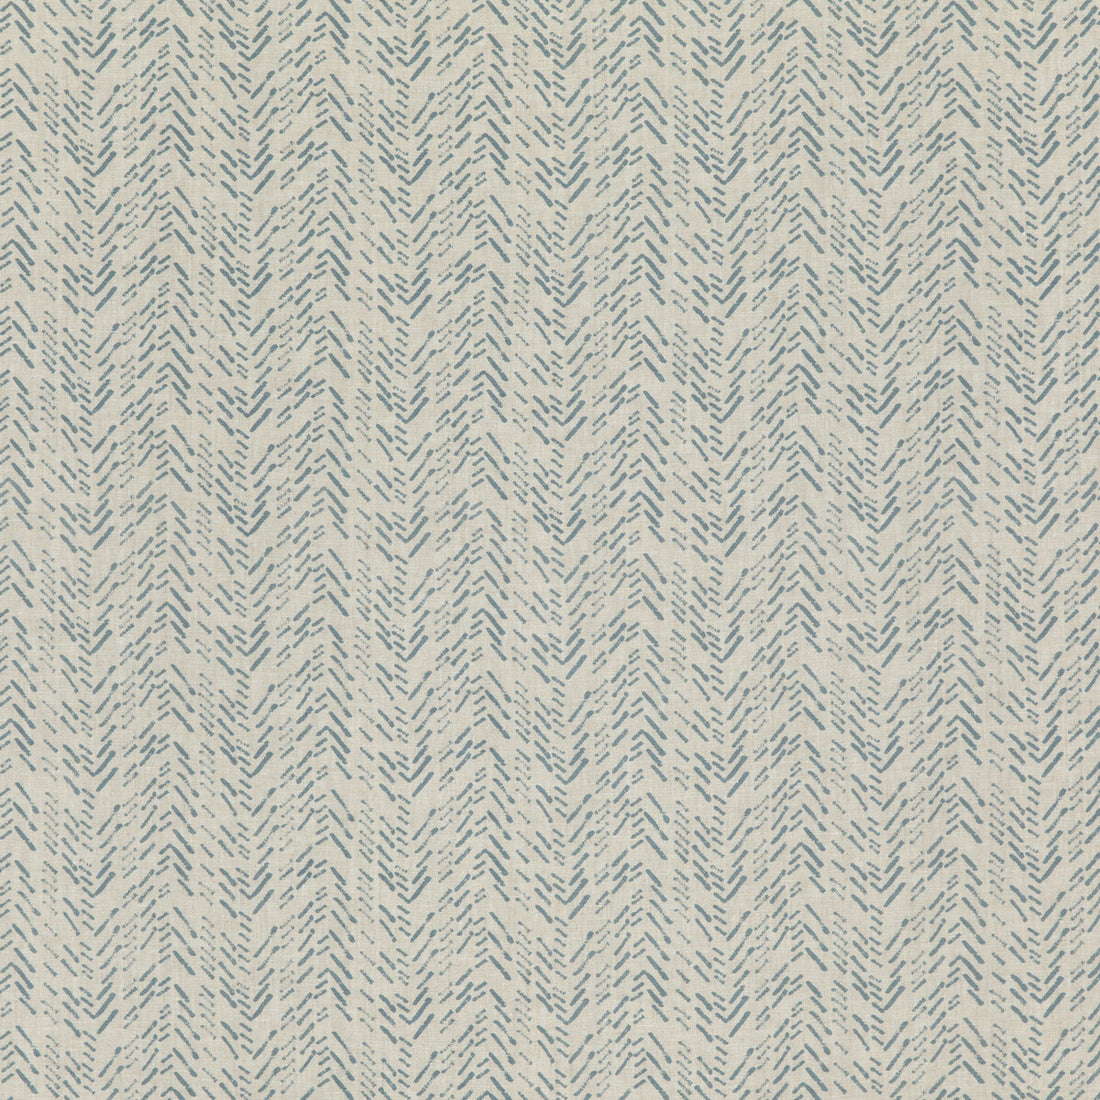 Izora fabric in teal color - pattern ED75035.2.0 - by Threads in the Moro collection